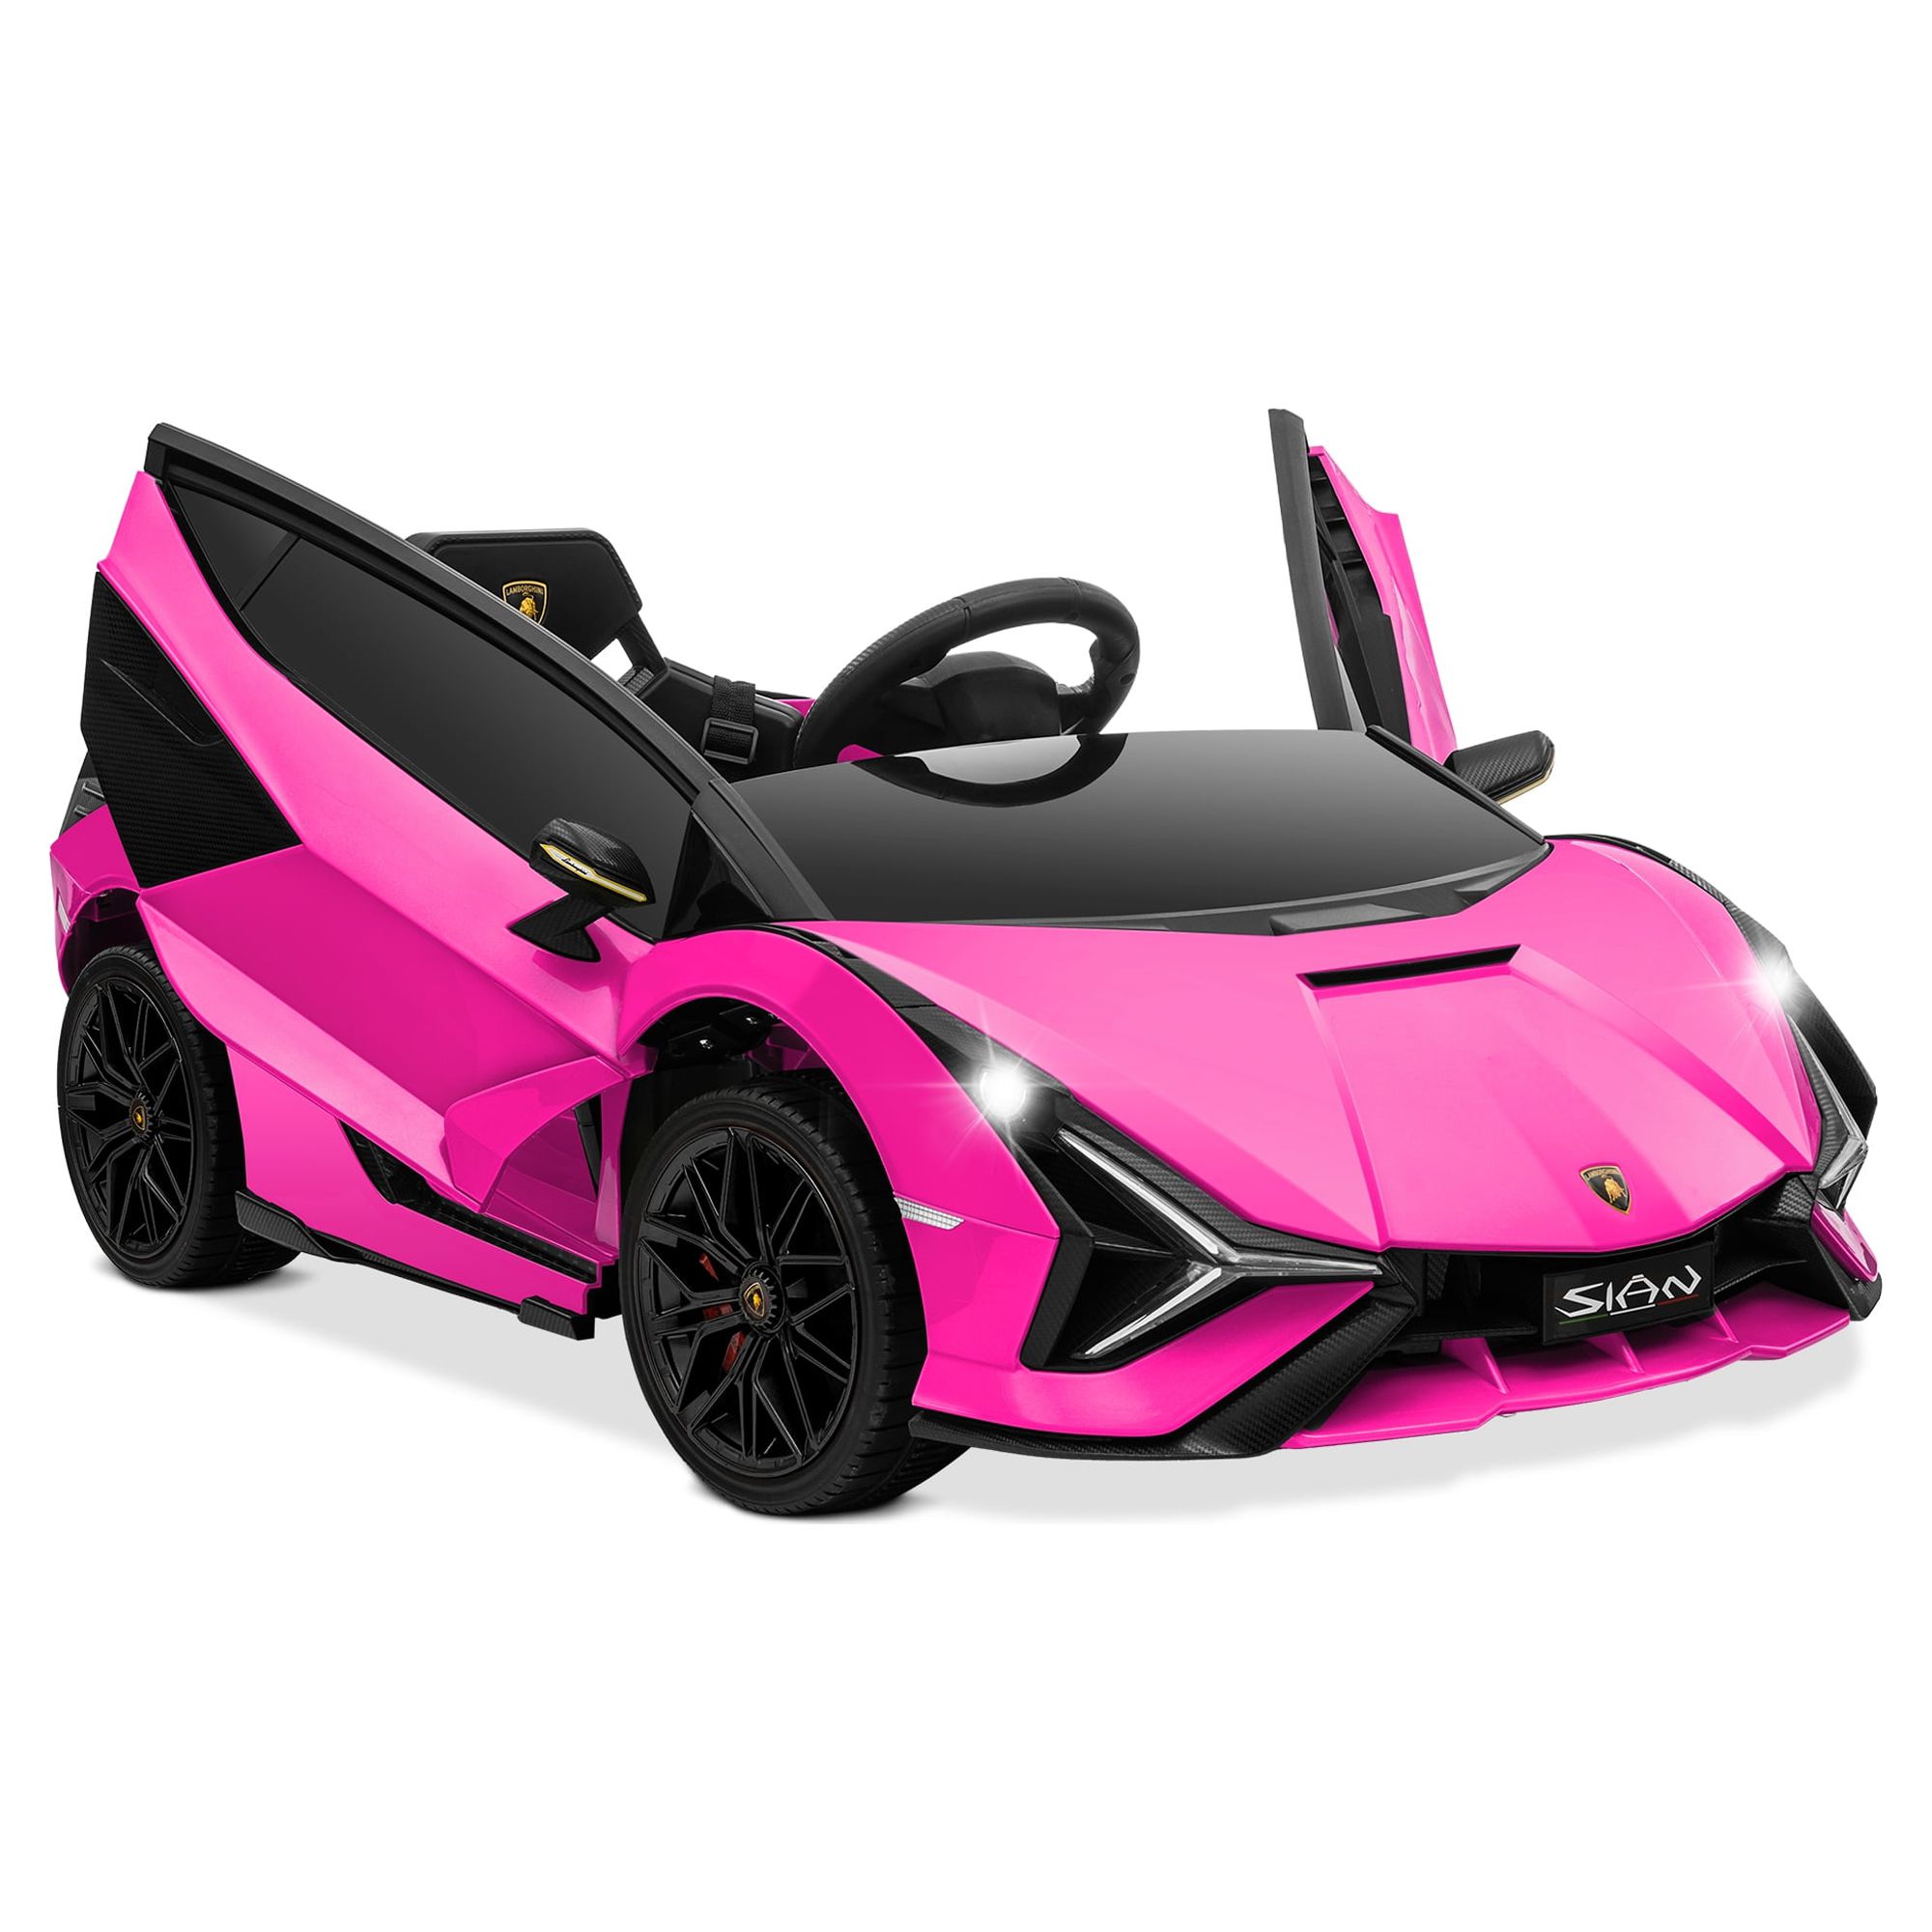 Kidzone Kids 12V Electric Ride On Licensed Lamborghini Sian Roadster Motorized Sport Vehicle With 2 Speed, Remote Control, Wheels Suspension, LED lights, USB/Bluetooth Music, Engine Sounds, Pink - image 1 of 6